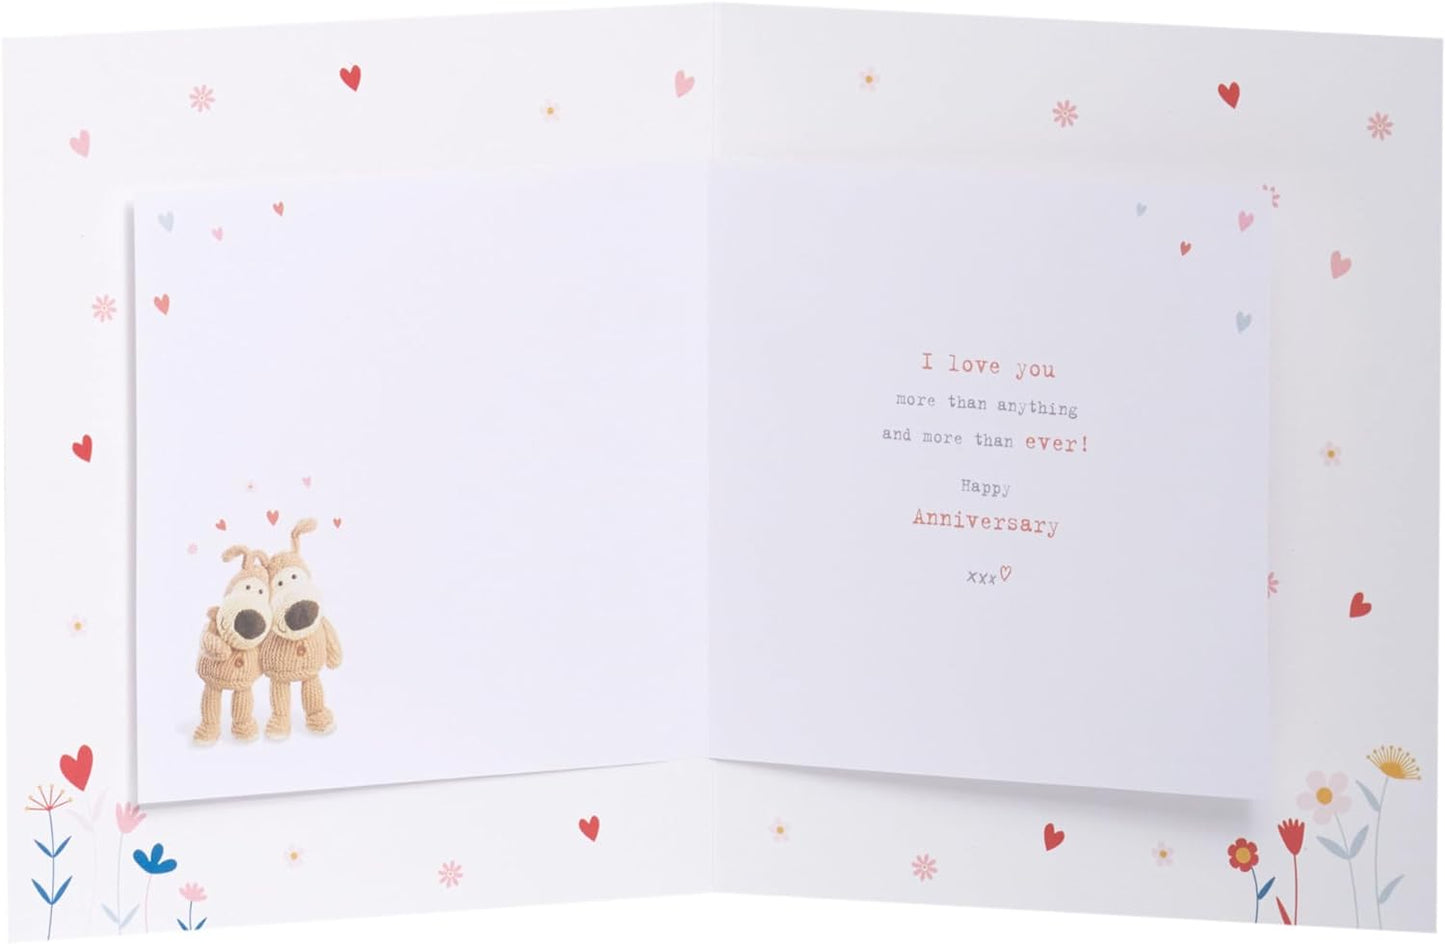 Boofle with Hear Gem Partner Anniversary Card